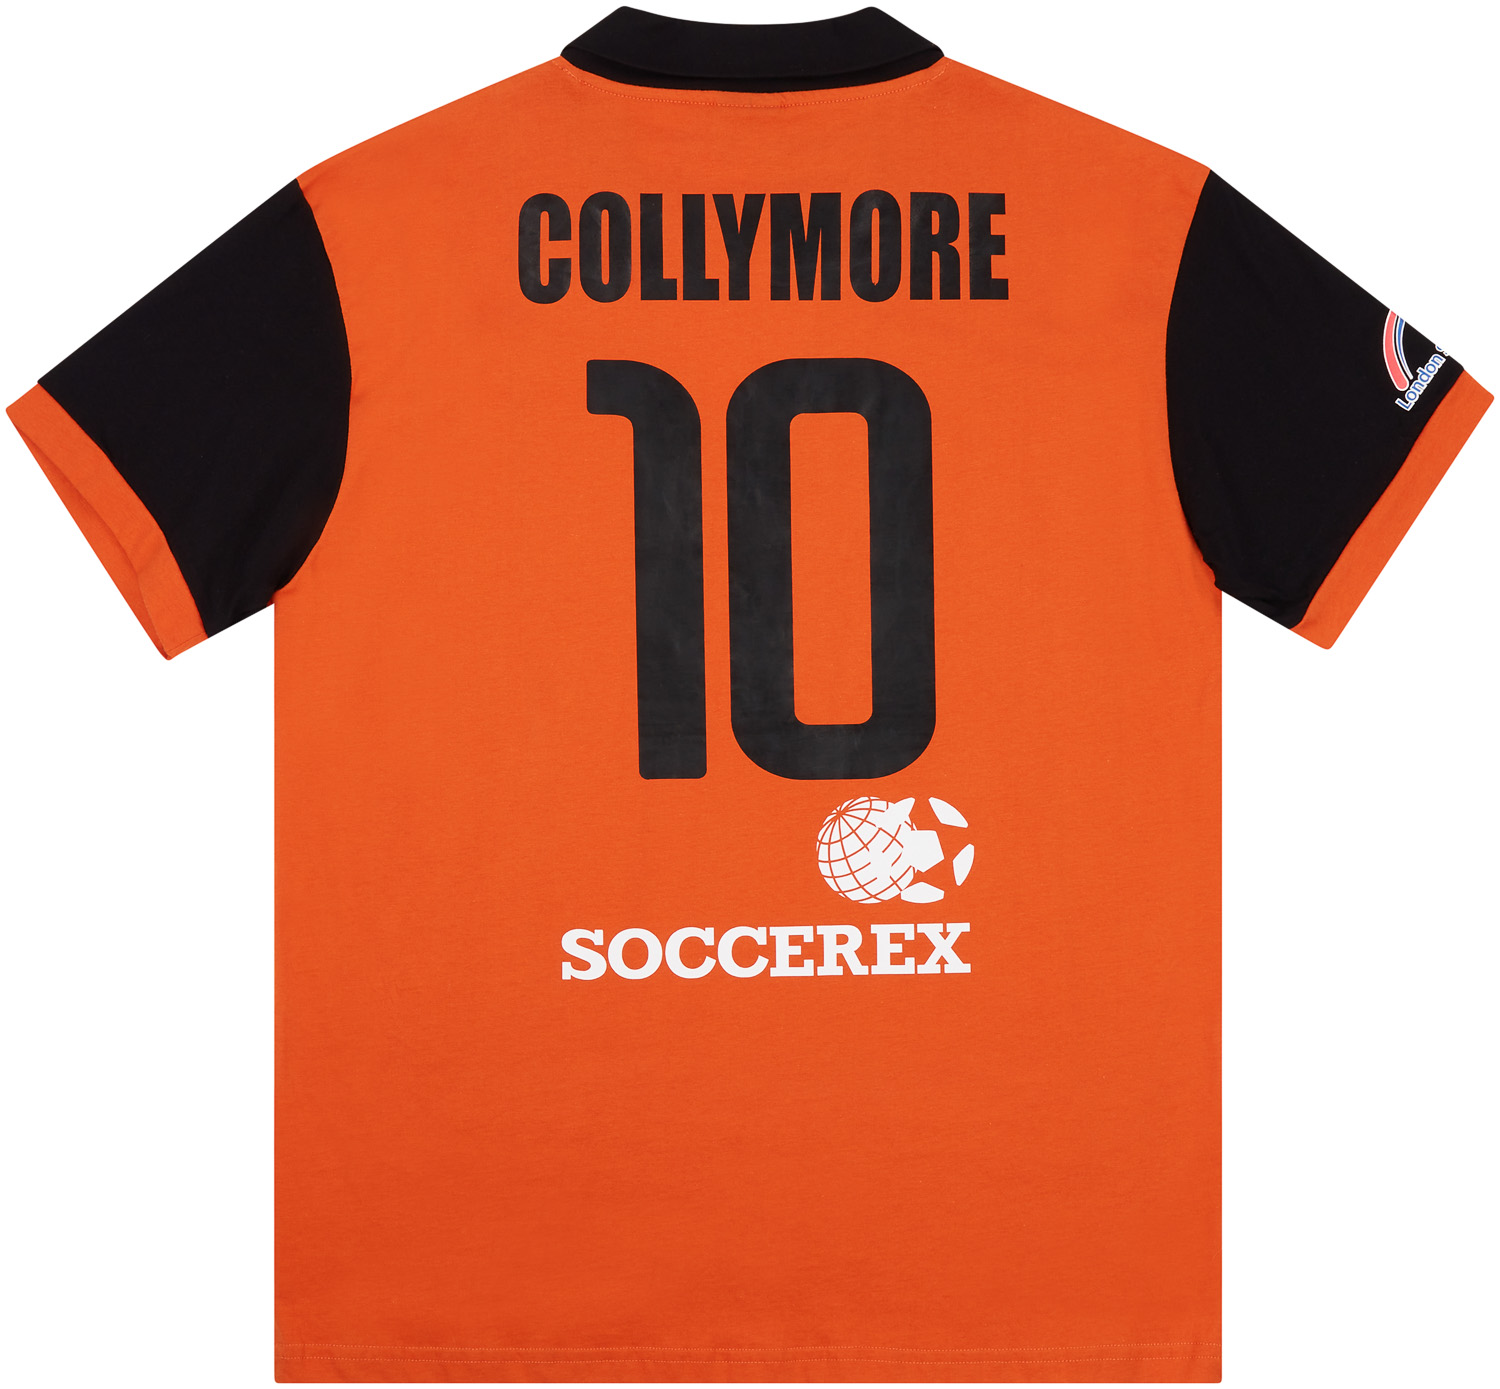 2011 Fulham London Legends Cup Masters Shirt Collymore #10